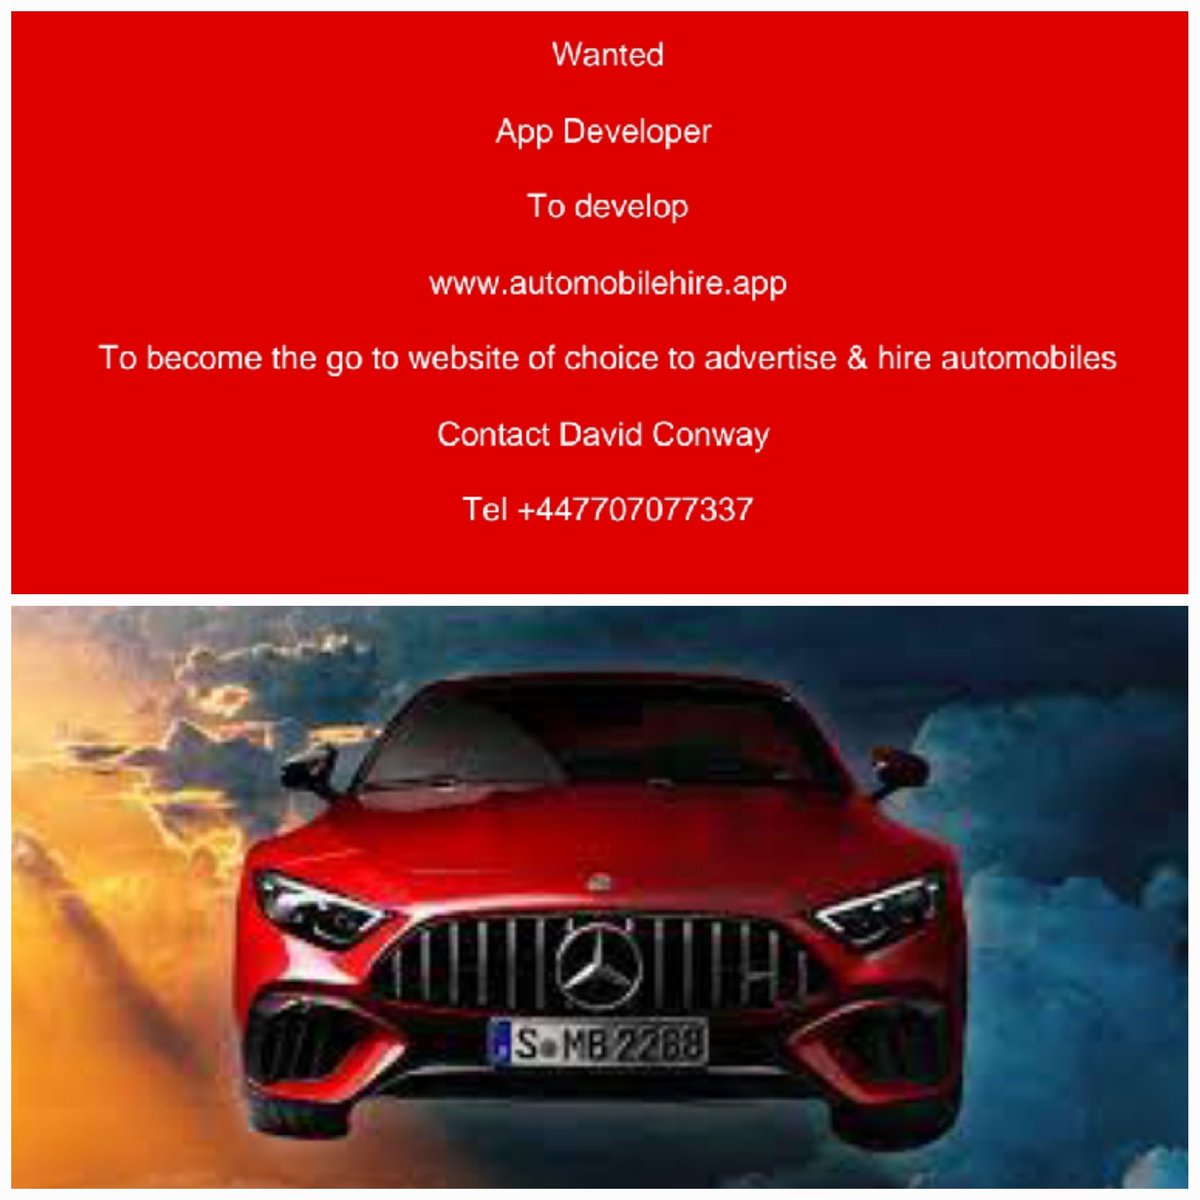 #AppDevelopment opportunity, I'm looking for an App Developer to collaborate with on what could be an amazing project you can contact me David Conway on Tel +447707077337 (UK) #app #Apps #AppStore #appdevelopers #seo #marketing #sales #branding #automobiles